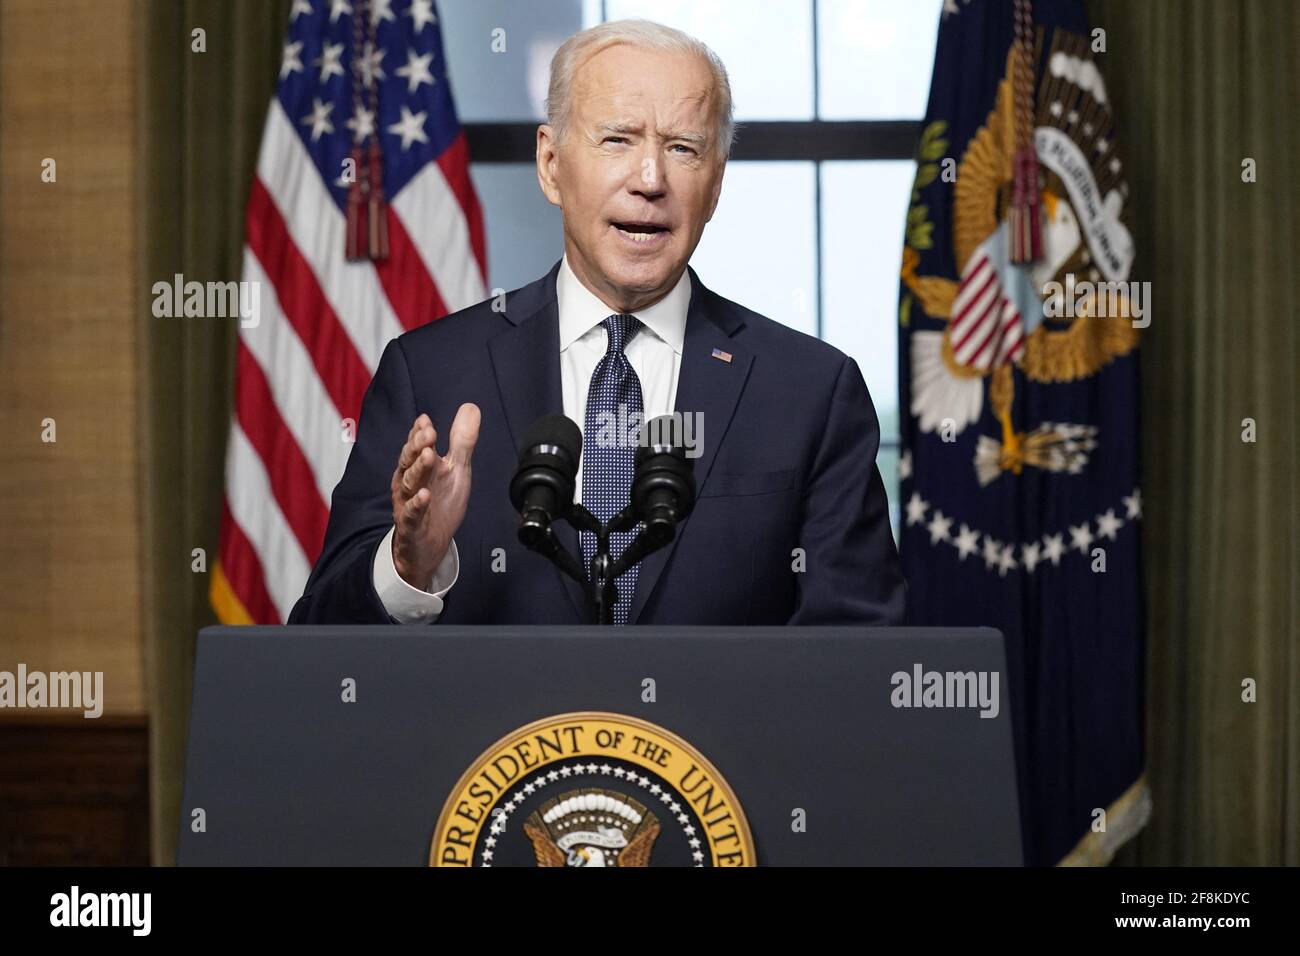 President Joe Biden speaks from the Treaty Room in the White House on Wednesday, April 14, 2021, about the withdrawal of the remainder of U.S. troops from Afghanistan. (AP Photo/Andrew Harnik, Pool) Credit: Sipa USA/Alamy Live News Stock Photo